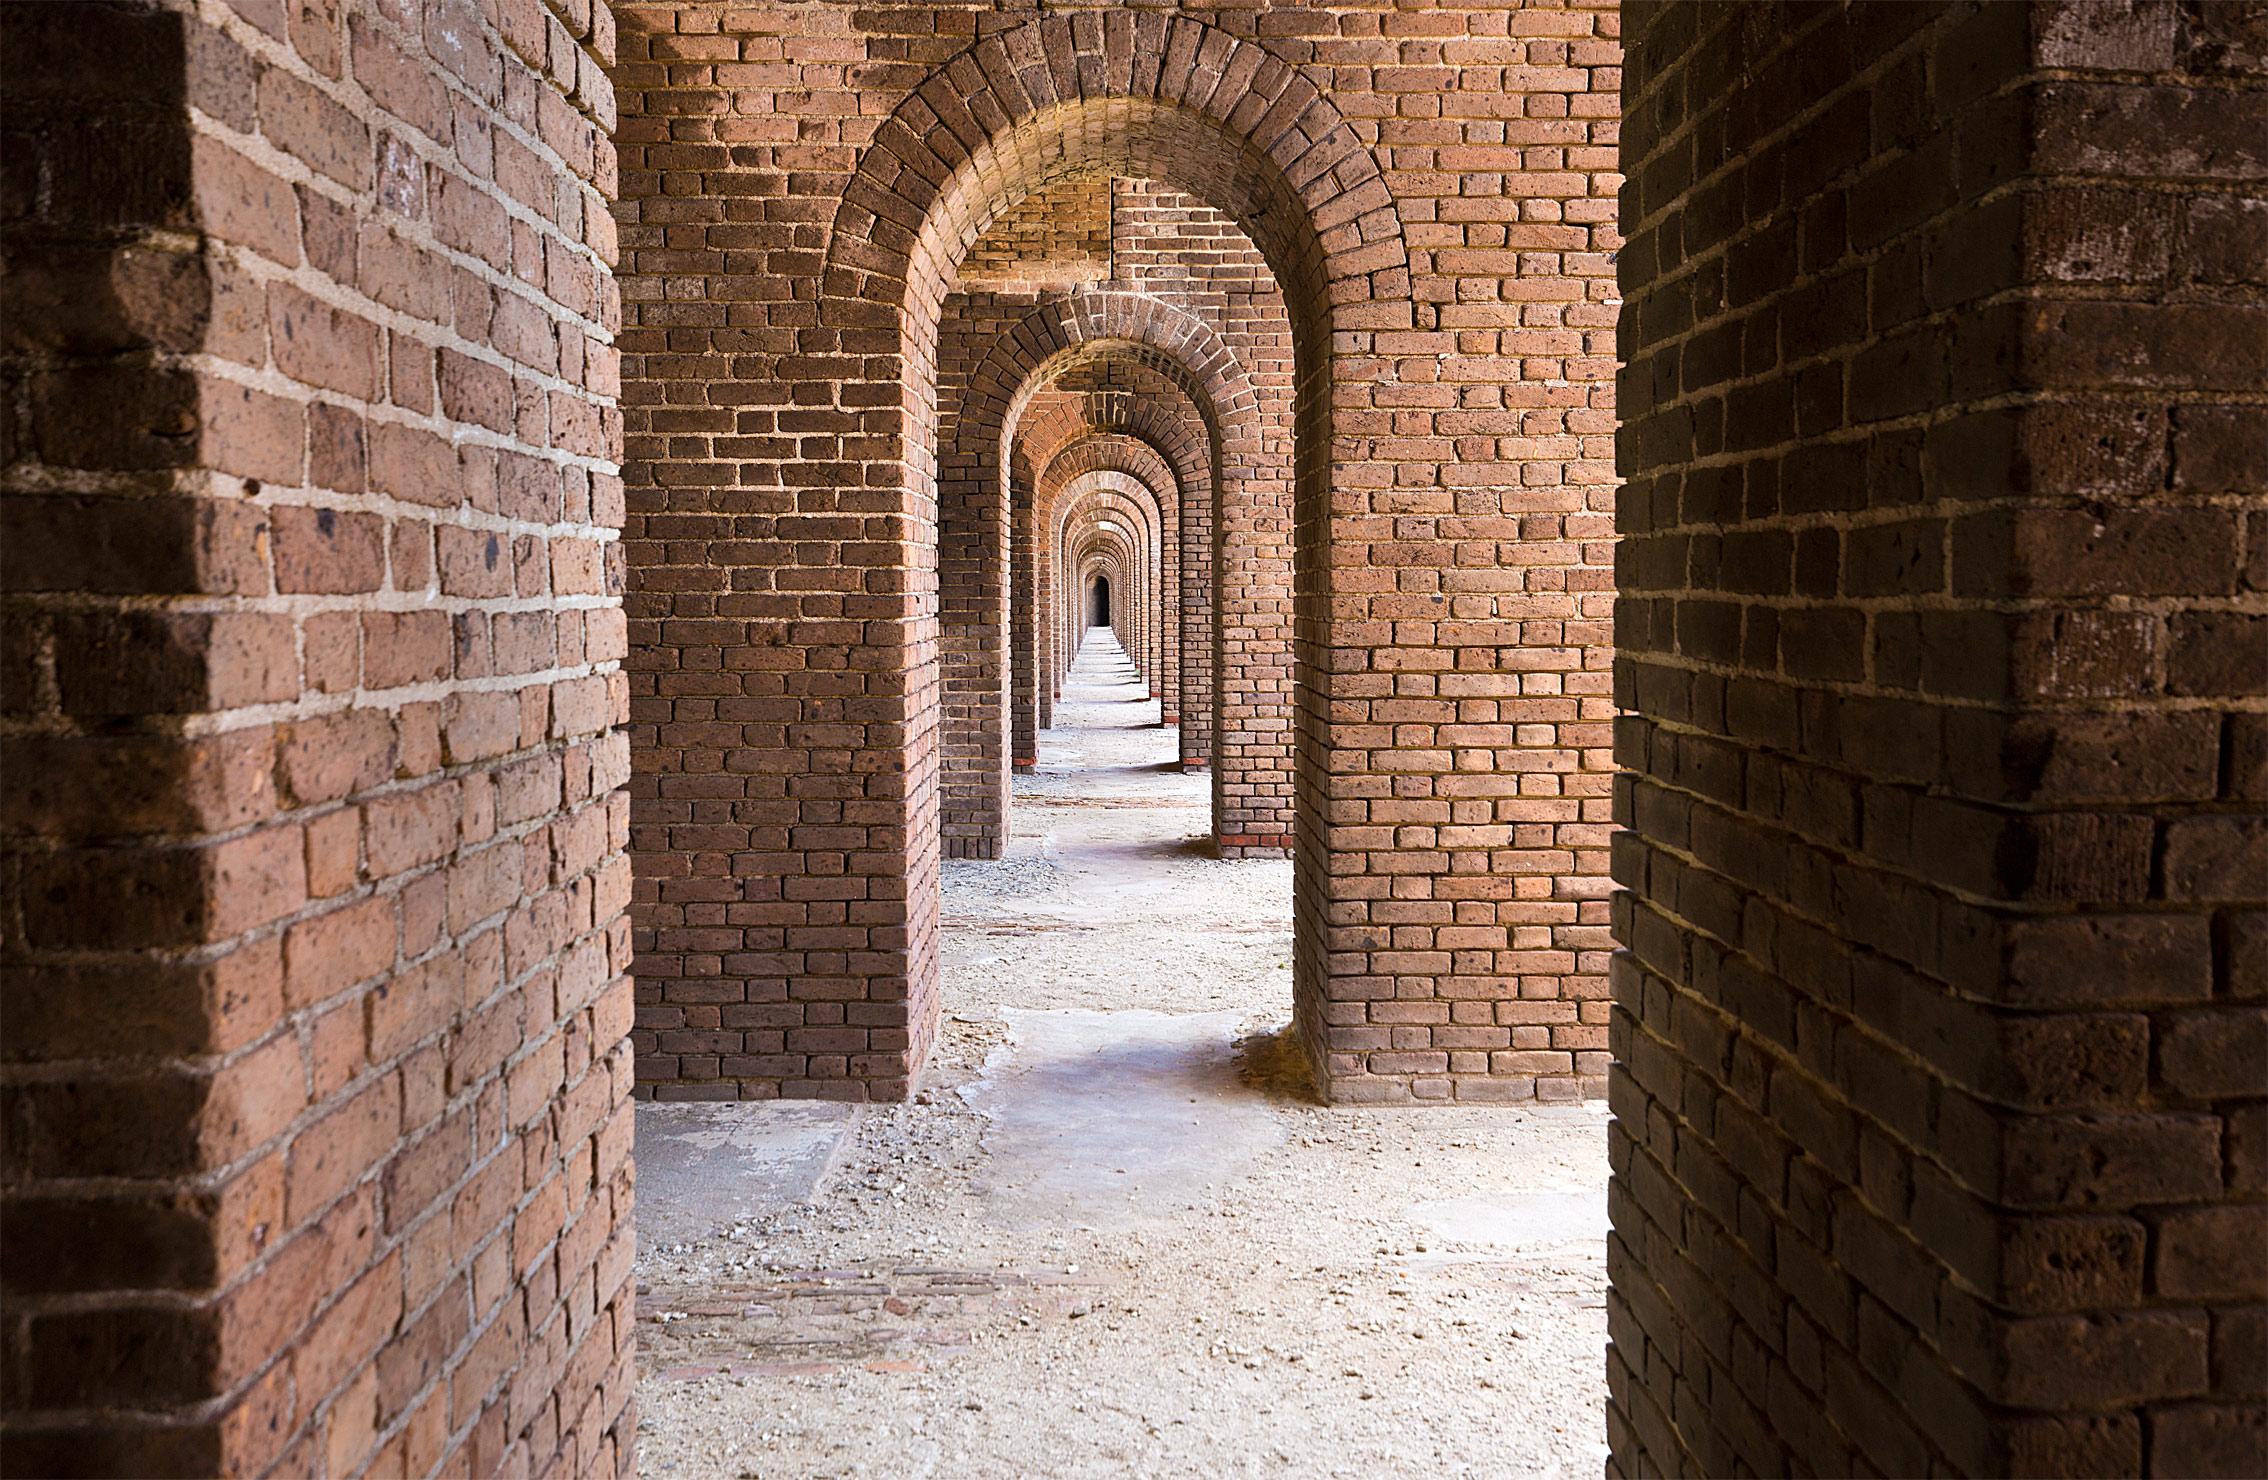 The Arches of Fort Jefferson